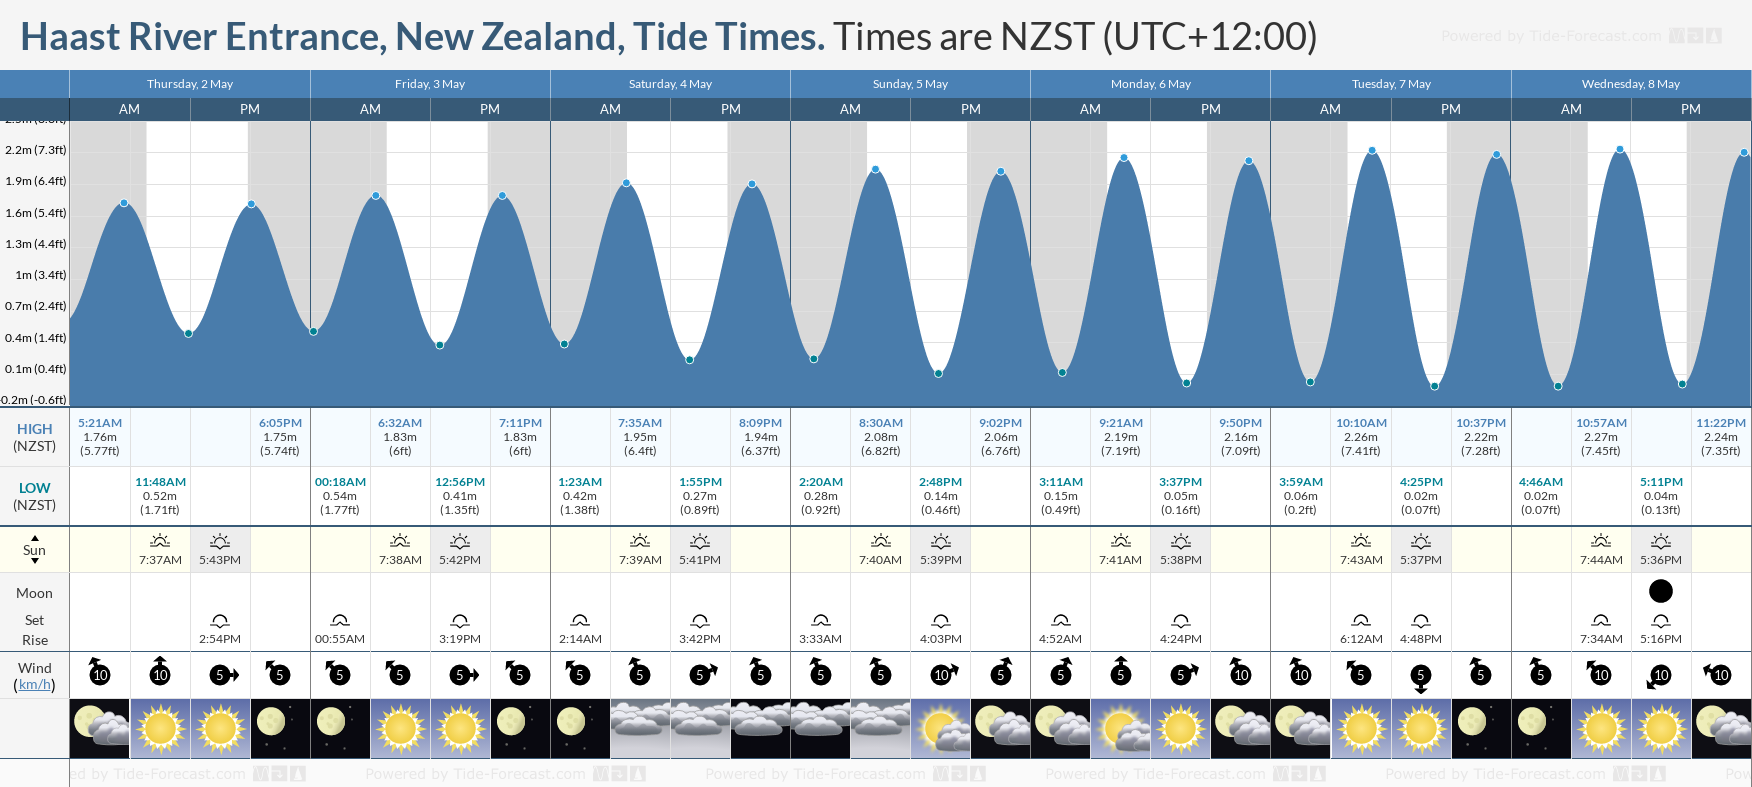 Haast River Entrance, New Zealand Tide Chart including high and low tide tide times for the next 7 days